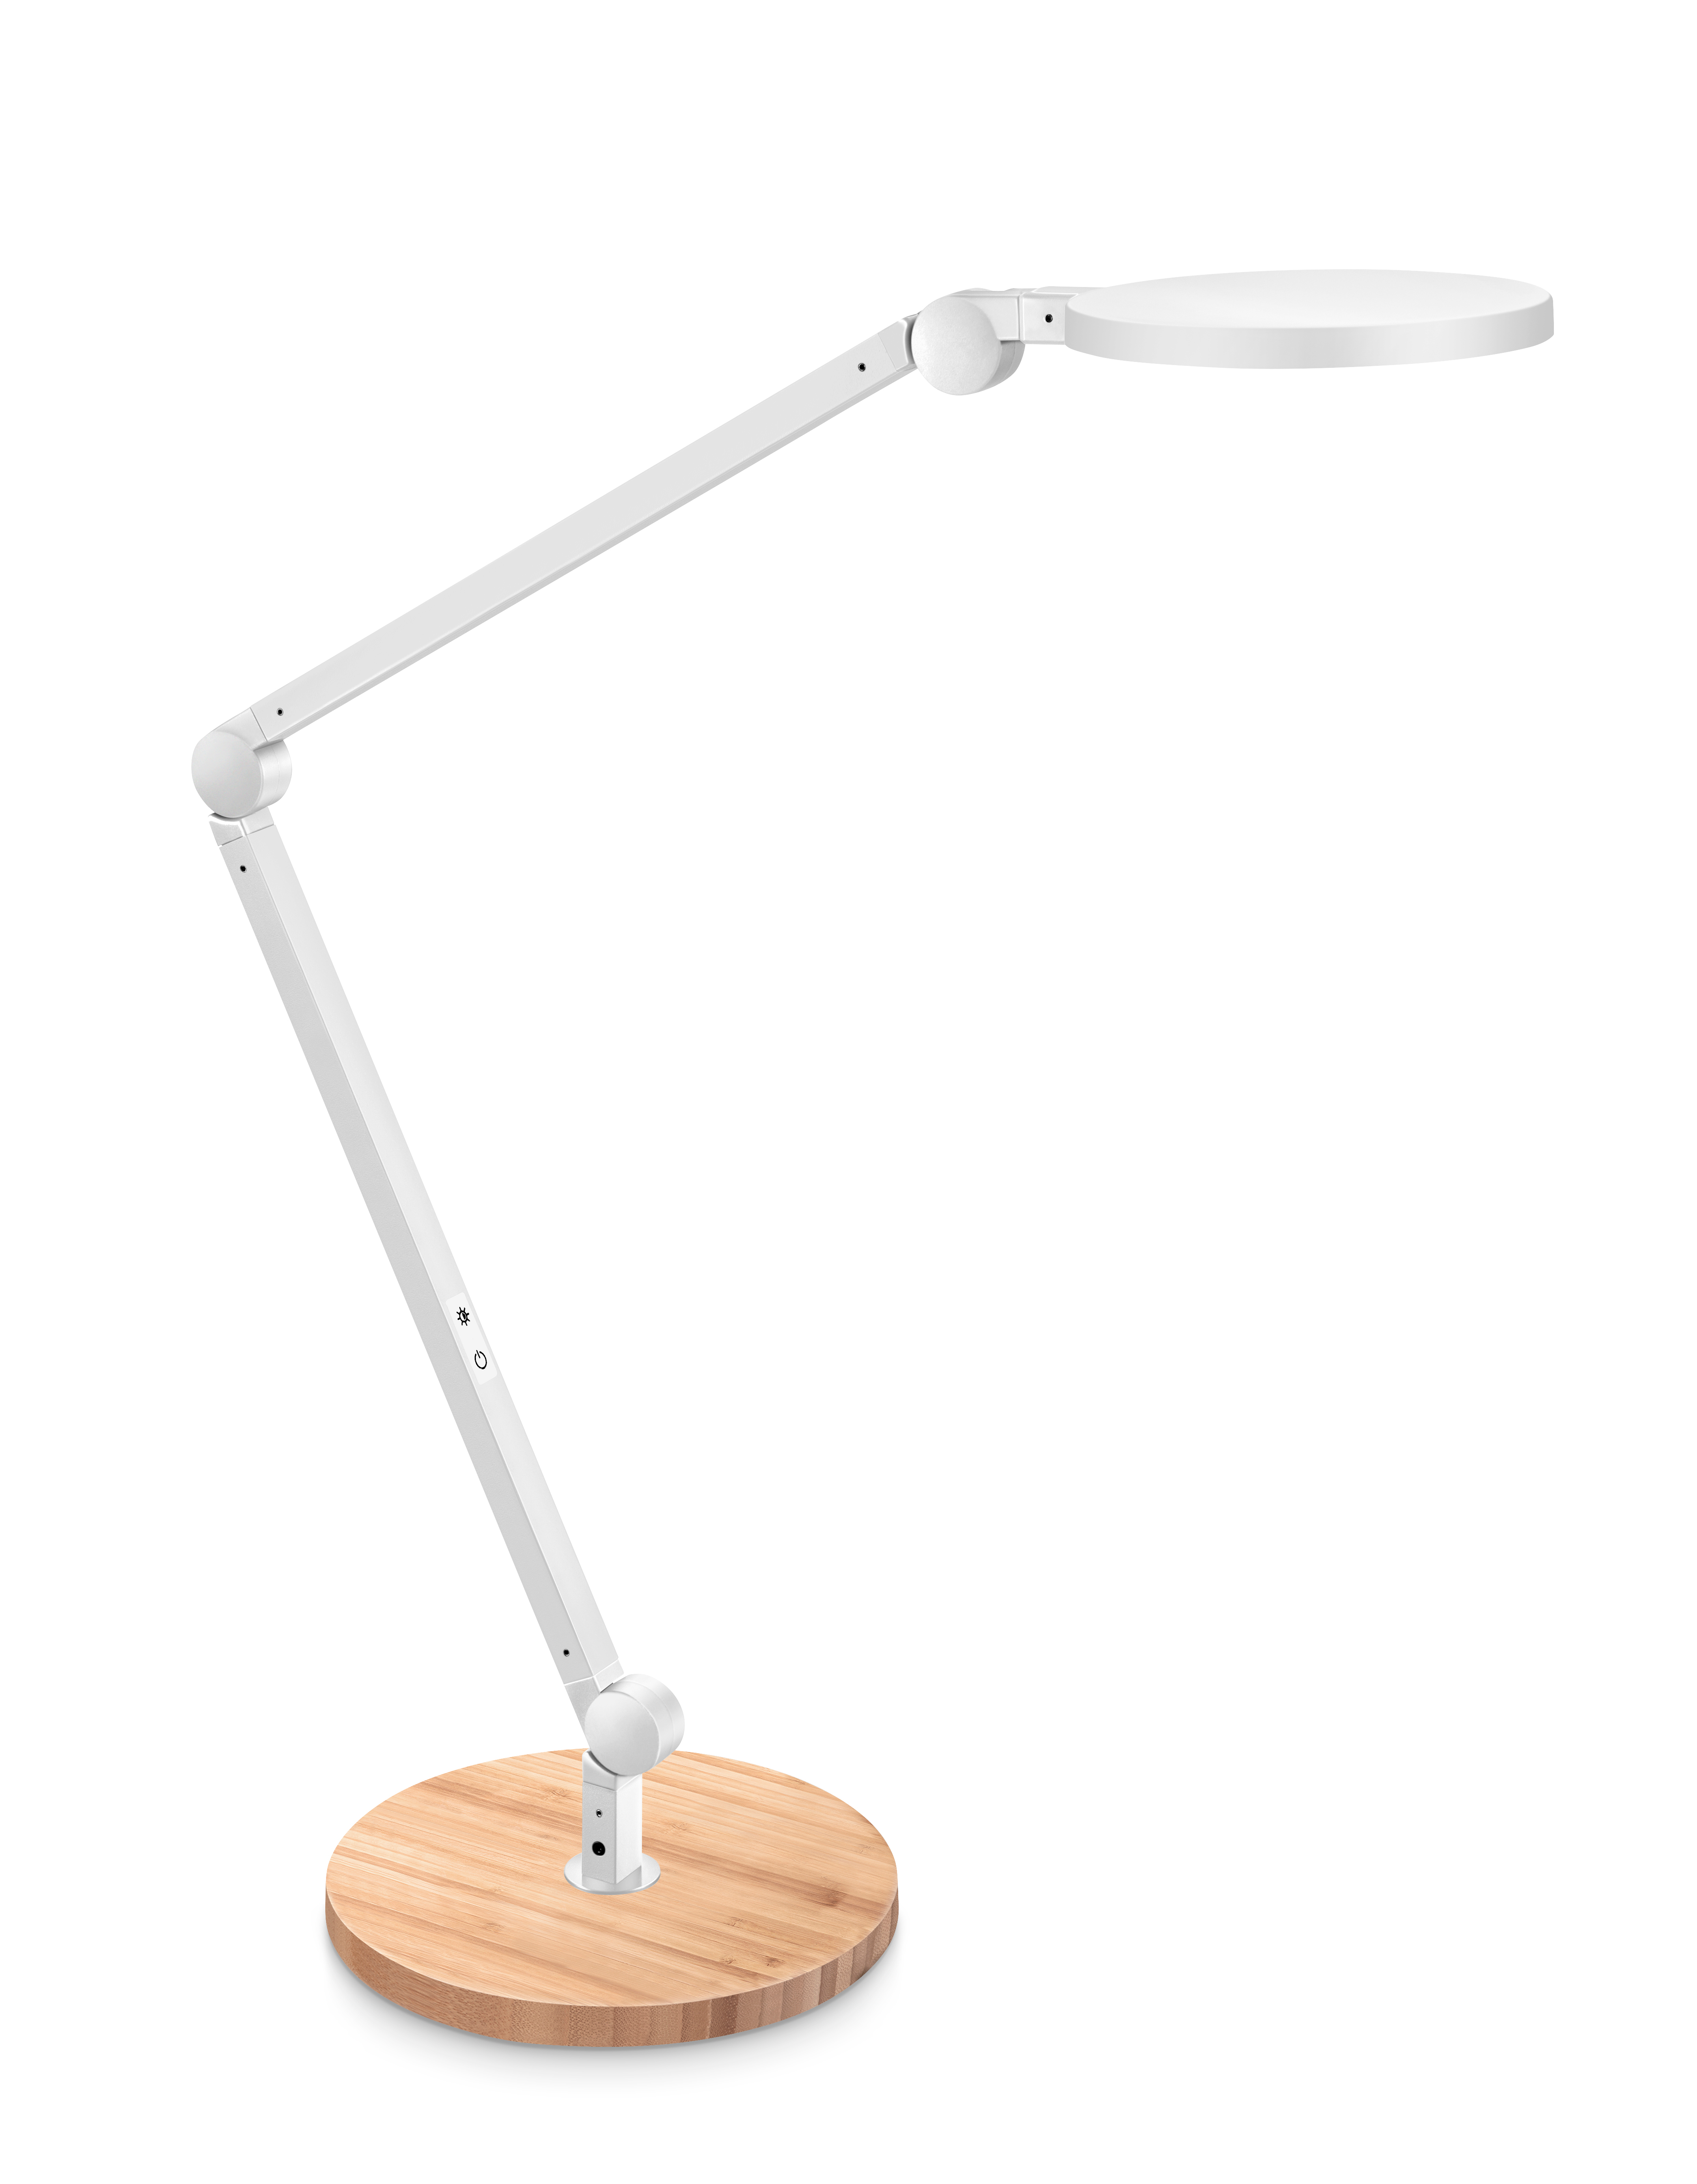 CEP Lampe de table GIANT CLED-0350Sil Chêne, dimmable 11W